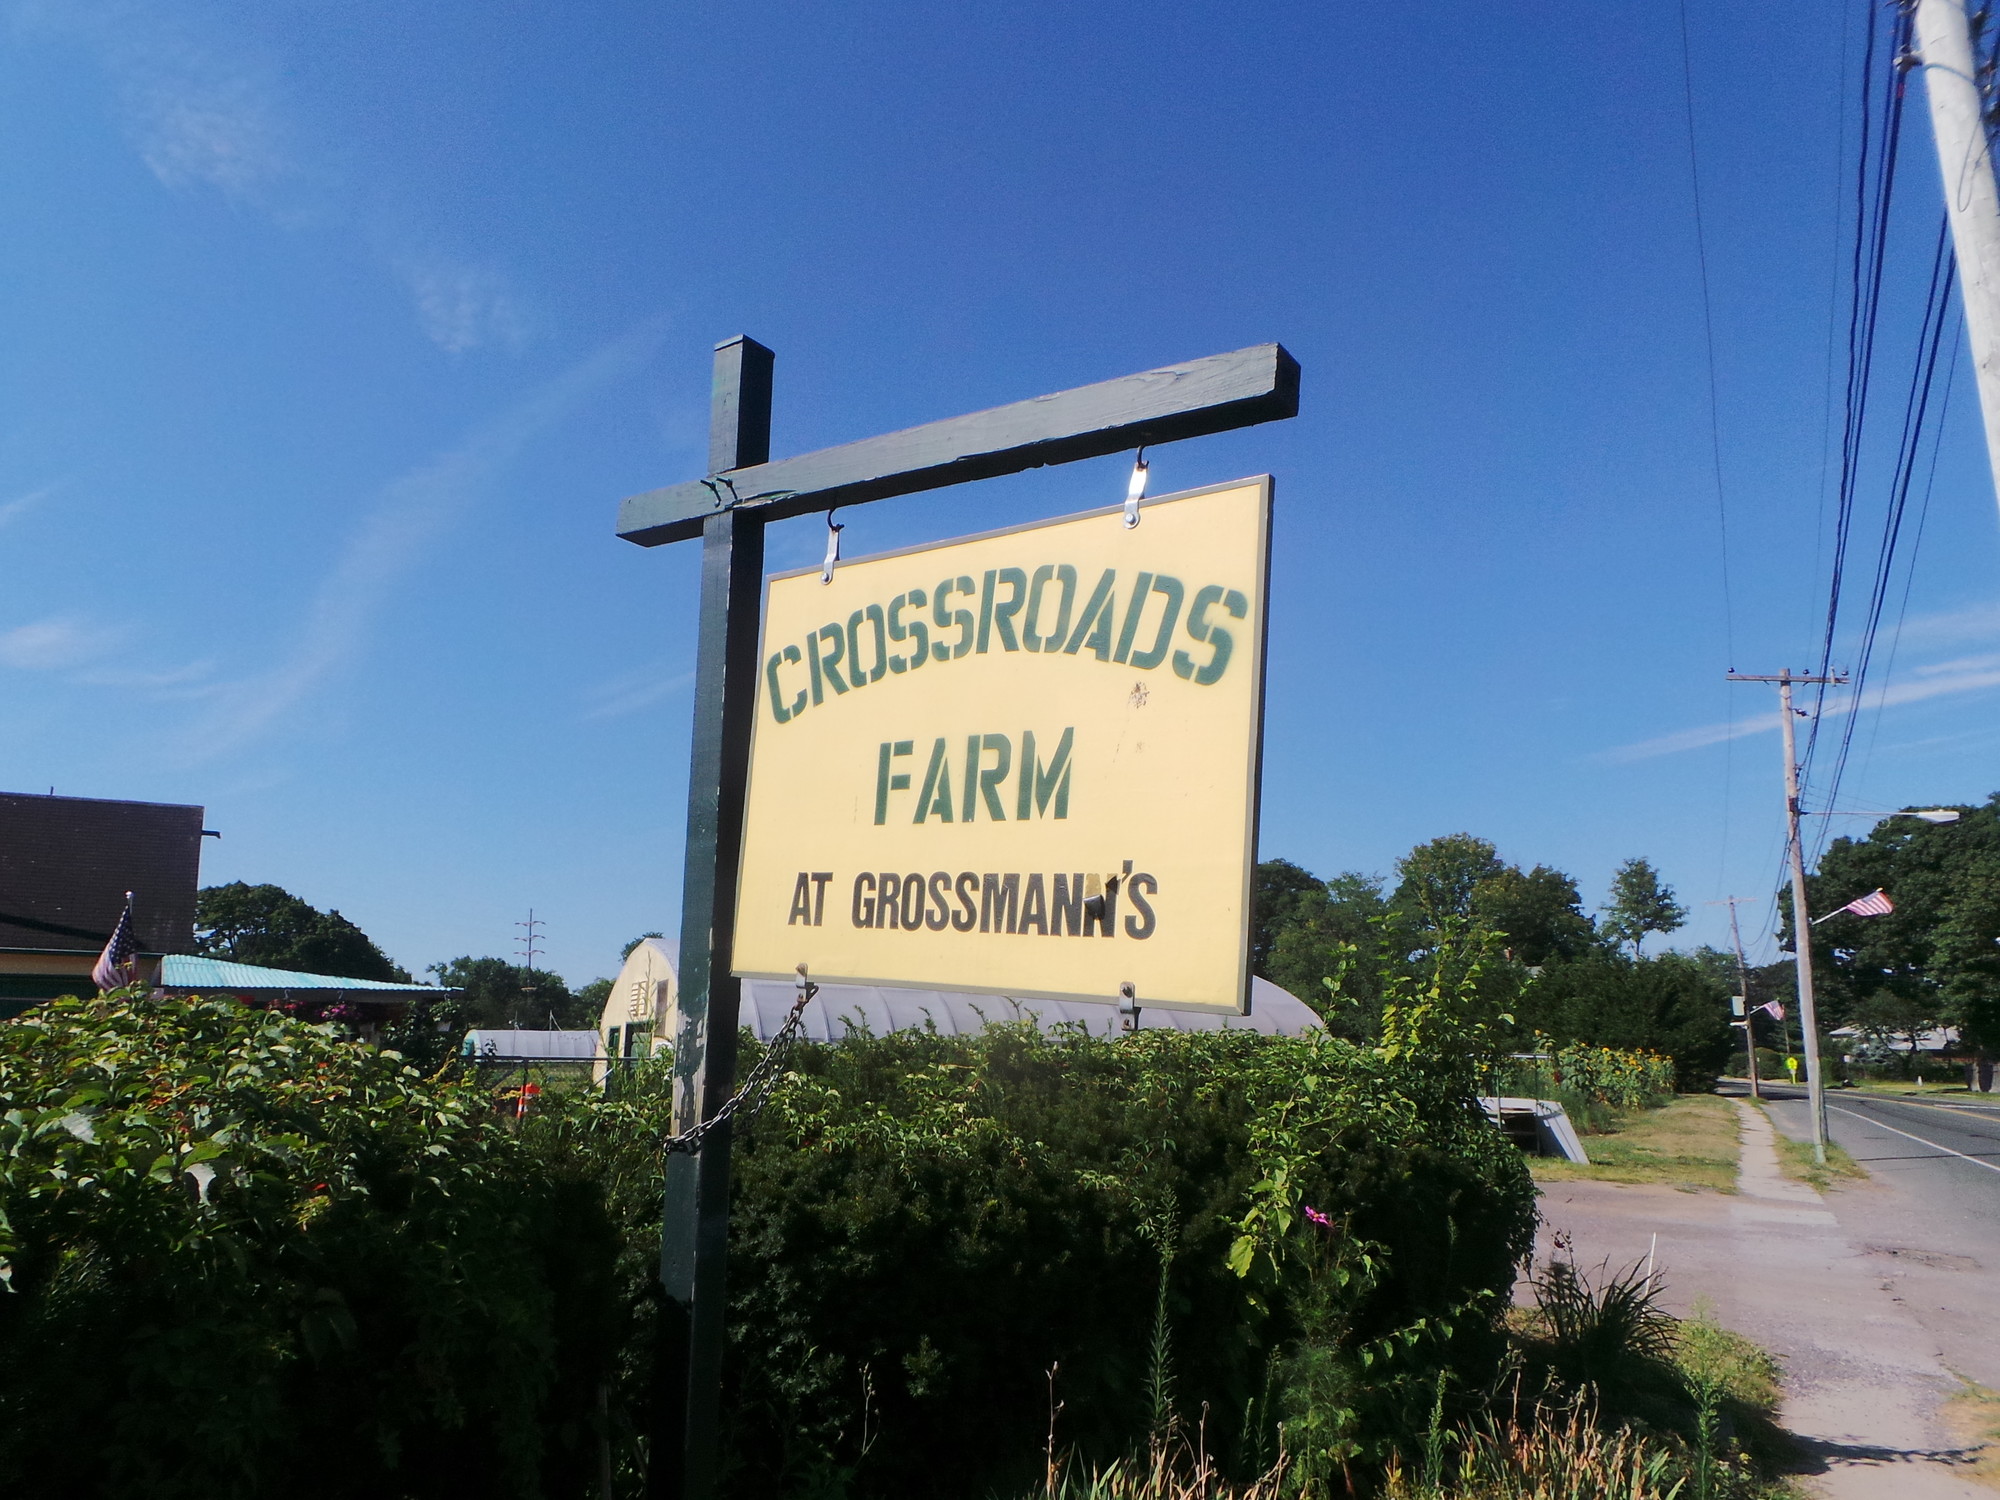 Crossroads Farm's Folk Festival will be the first of its kind in southwest Nassau County.